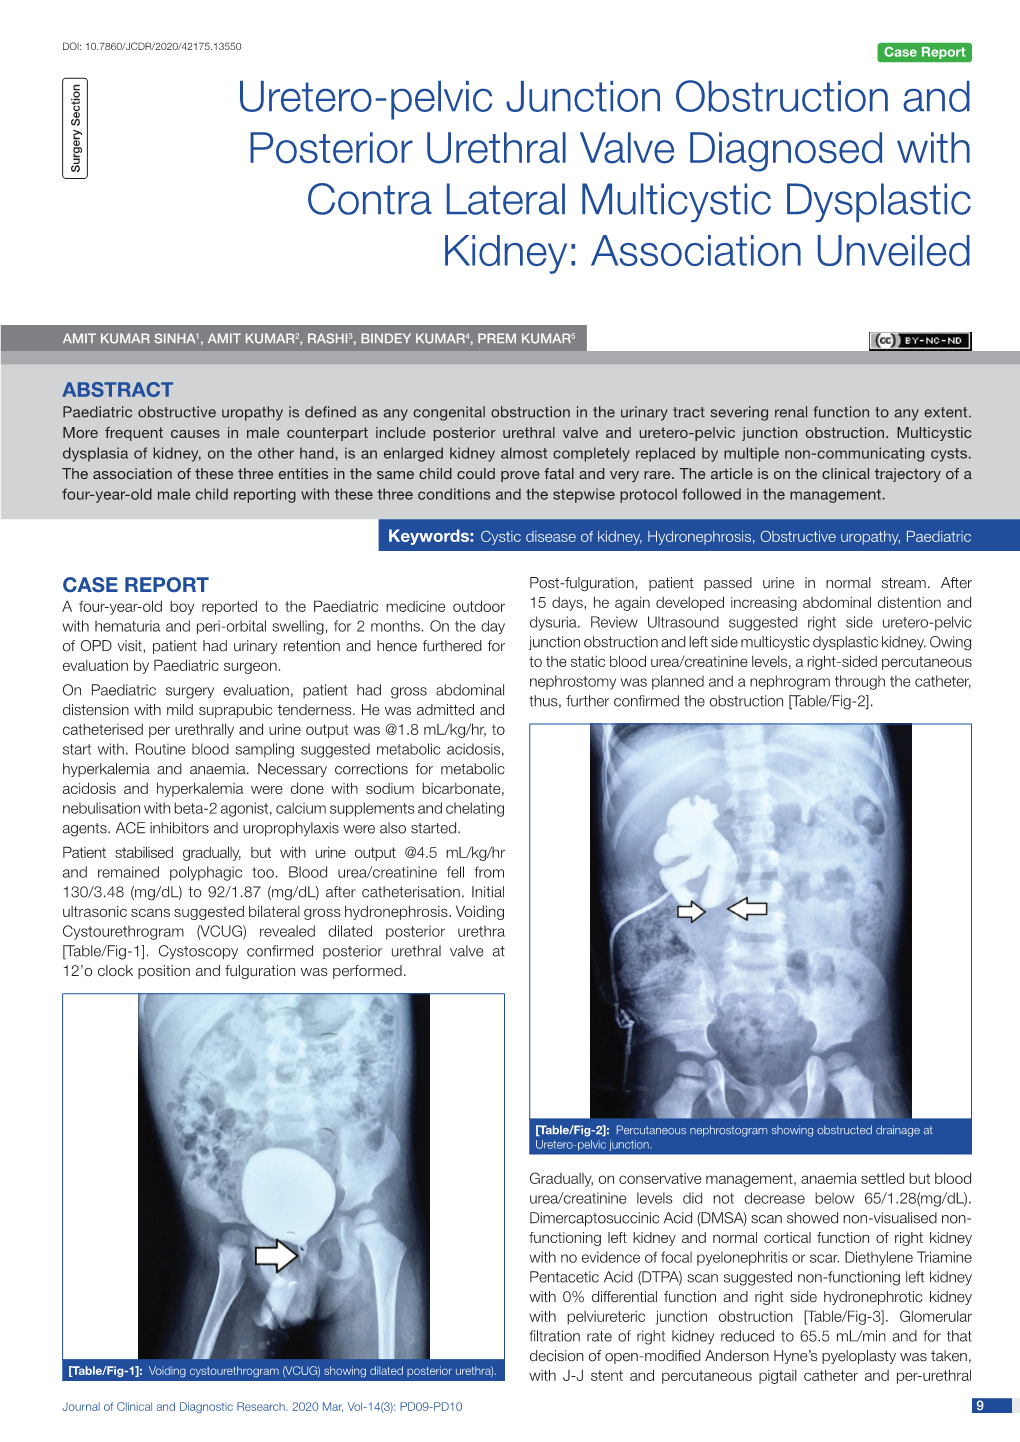 Uretero-Pelvic Junction Obstruction and Posterior Urethral Valve Diagnosed with Surgery Section Contra Lateral Multicystic Dysplastic Kidney: Association Unveiled